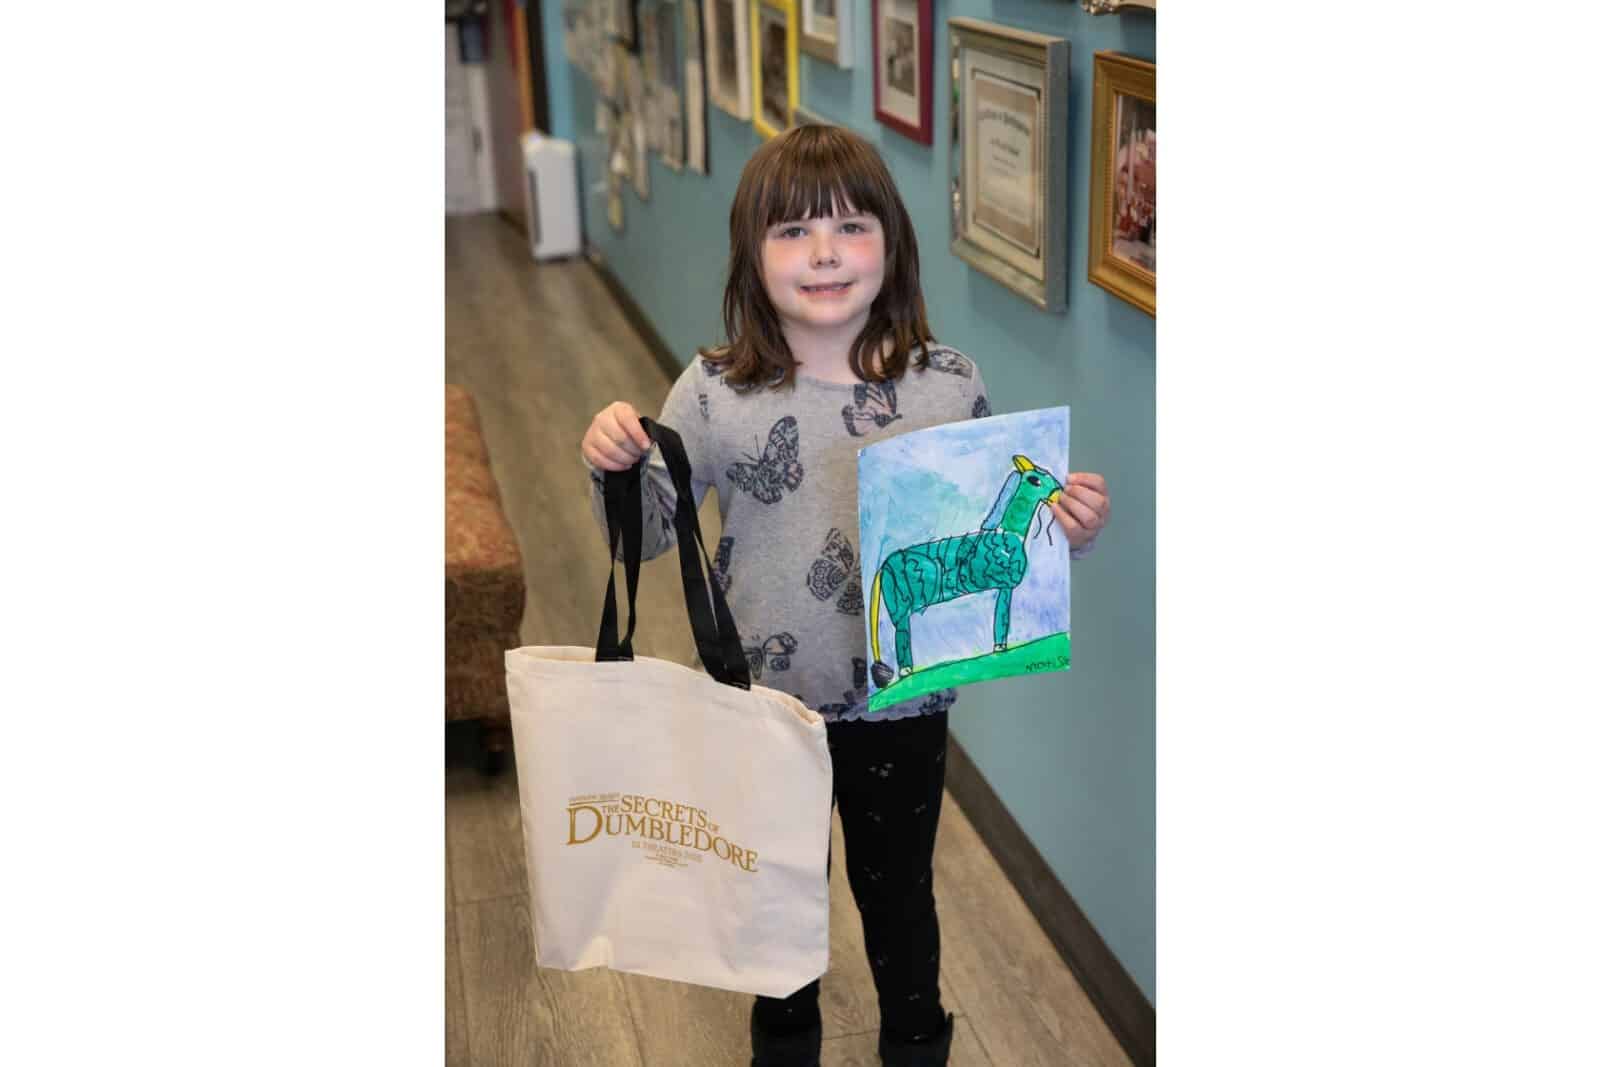 A student showing her artwork